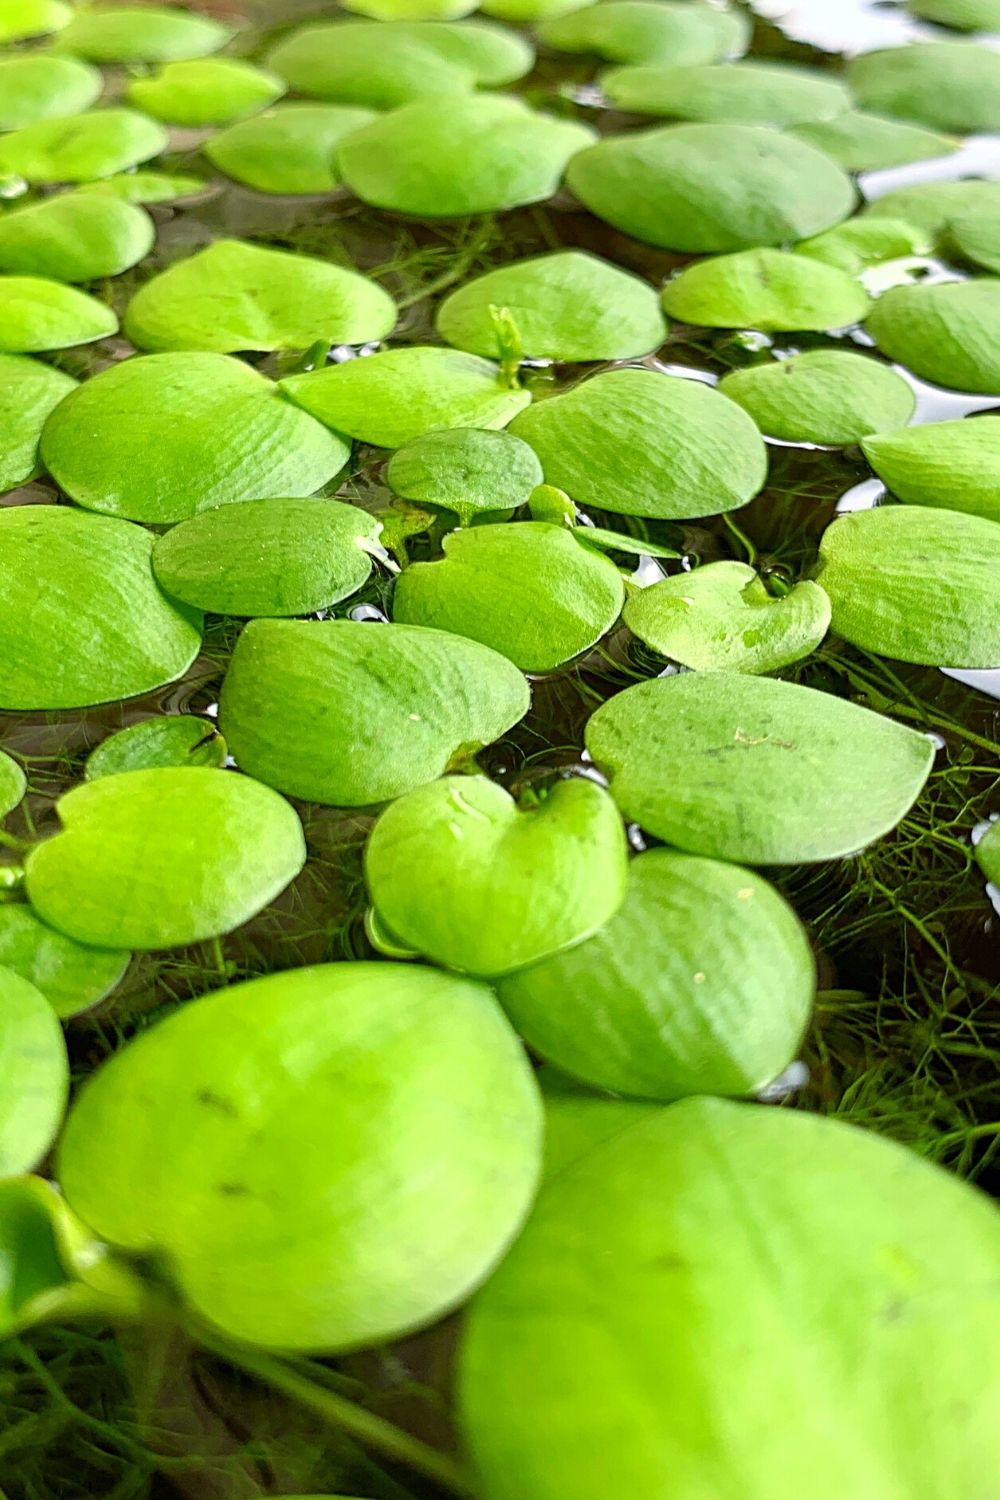 Amazon Frogbit offers excellent cover for betta fish and shrimps